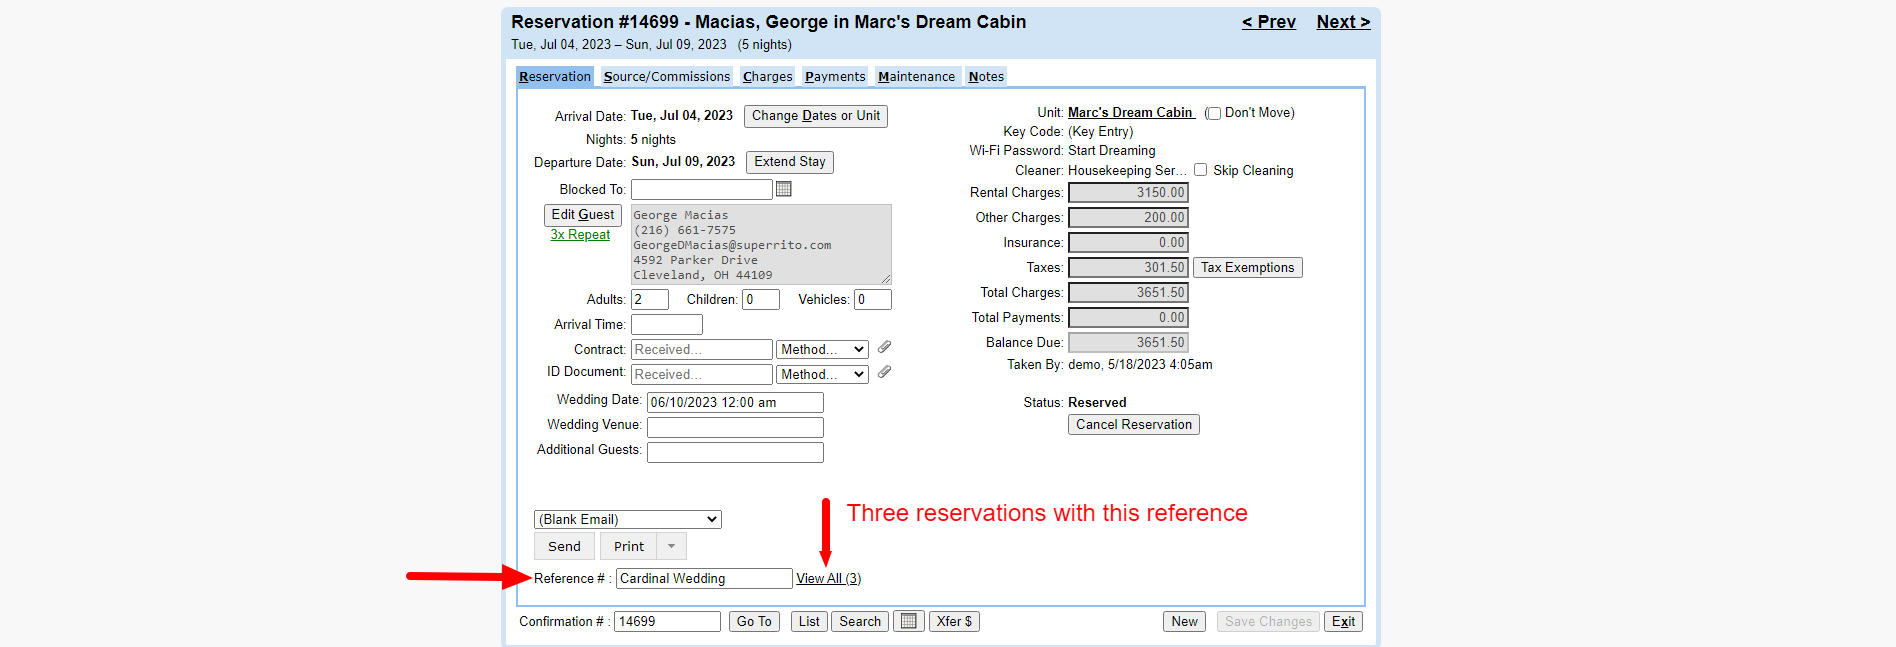 BrightSide Reservation Settings | Reference # Uses